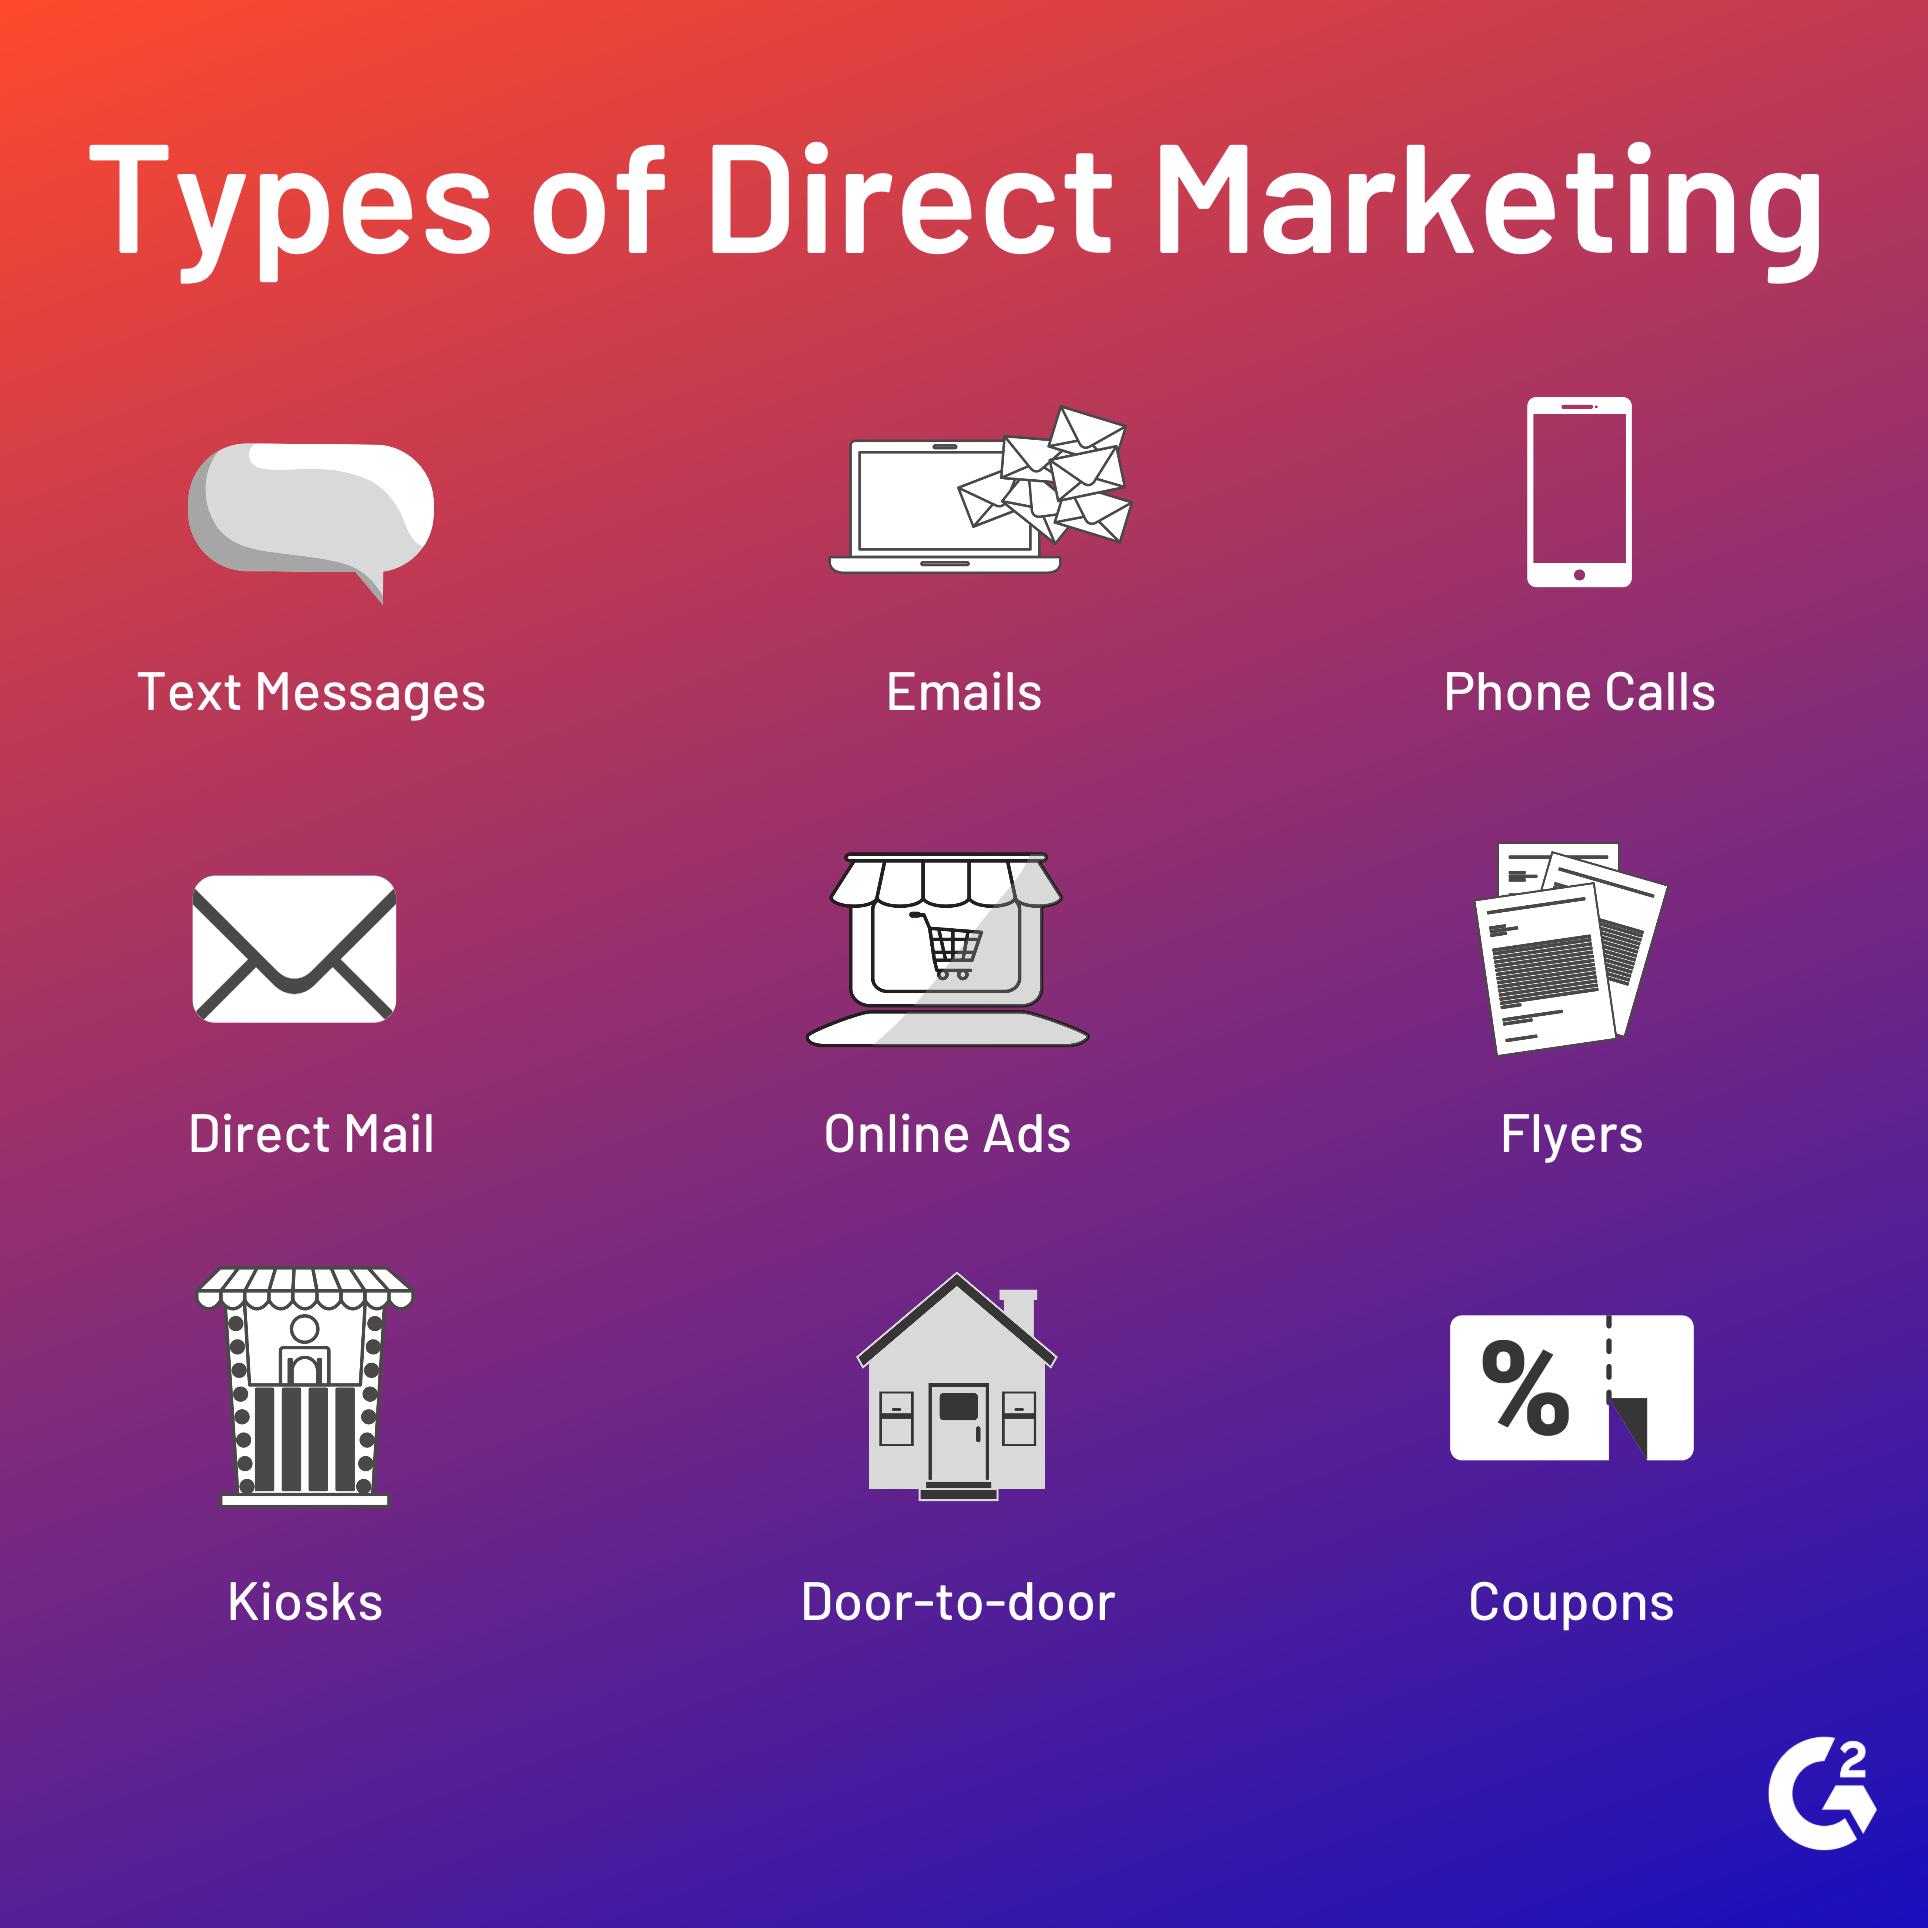 Types of direct marketing: emails, texts, calls, online ads, flyers, coupons, etc.